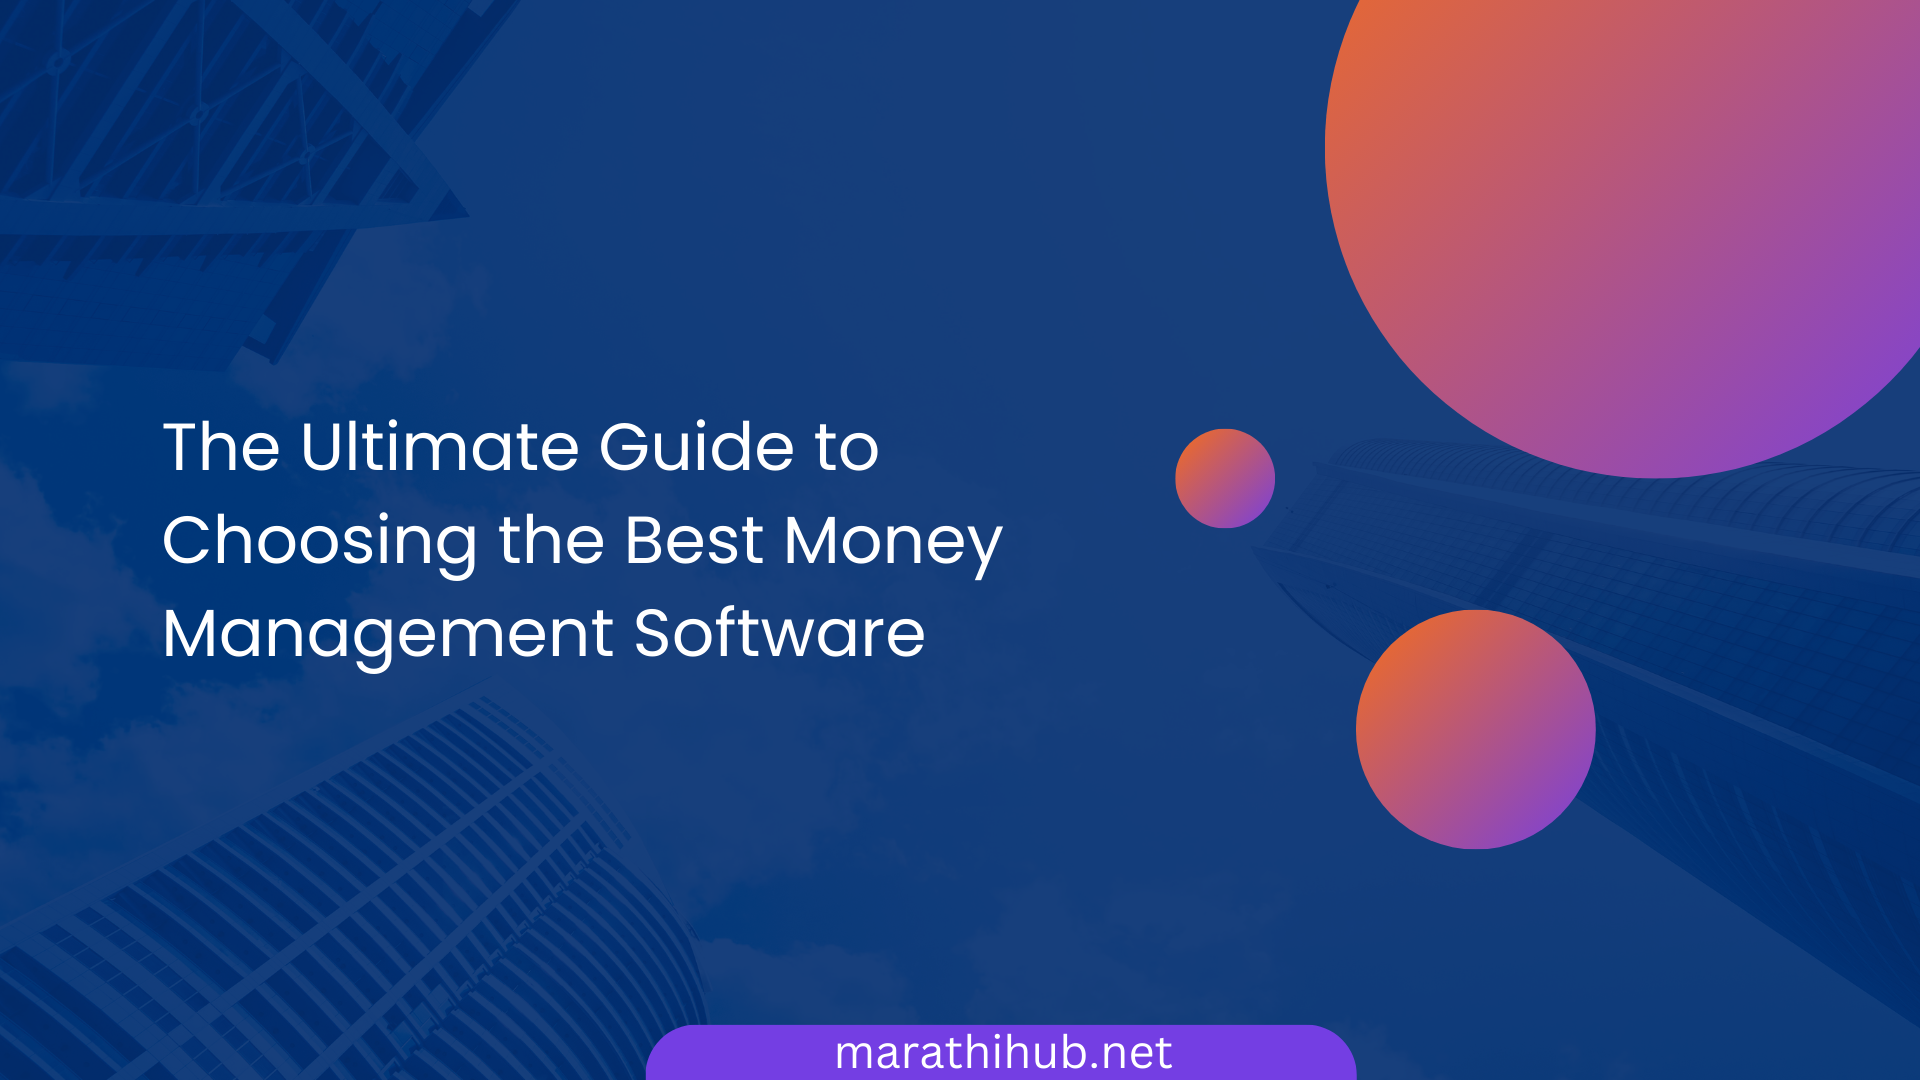 The Ultimate Guide to Choosing the Best Money Management Software